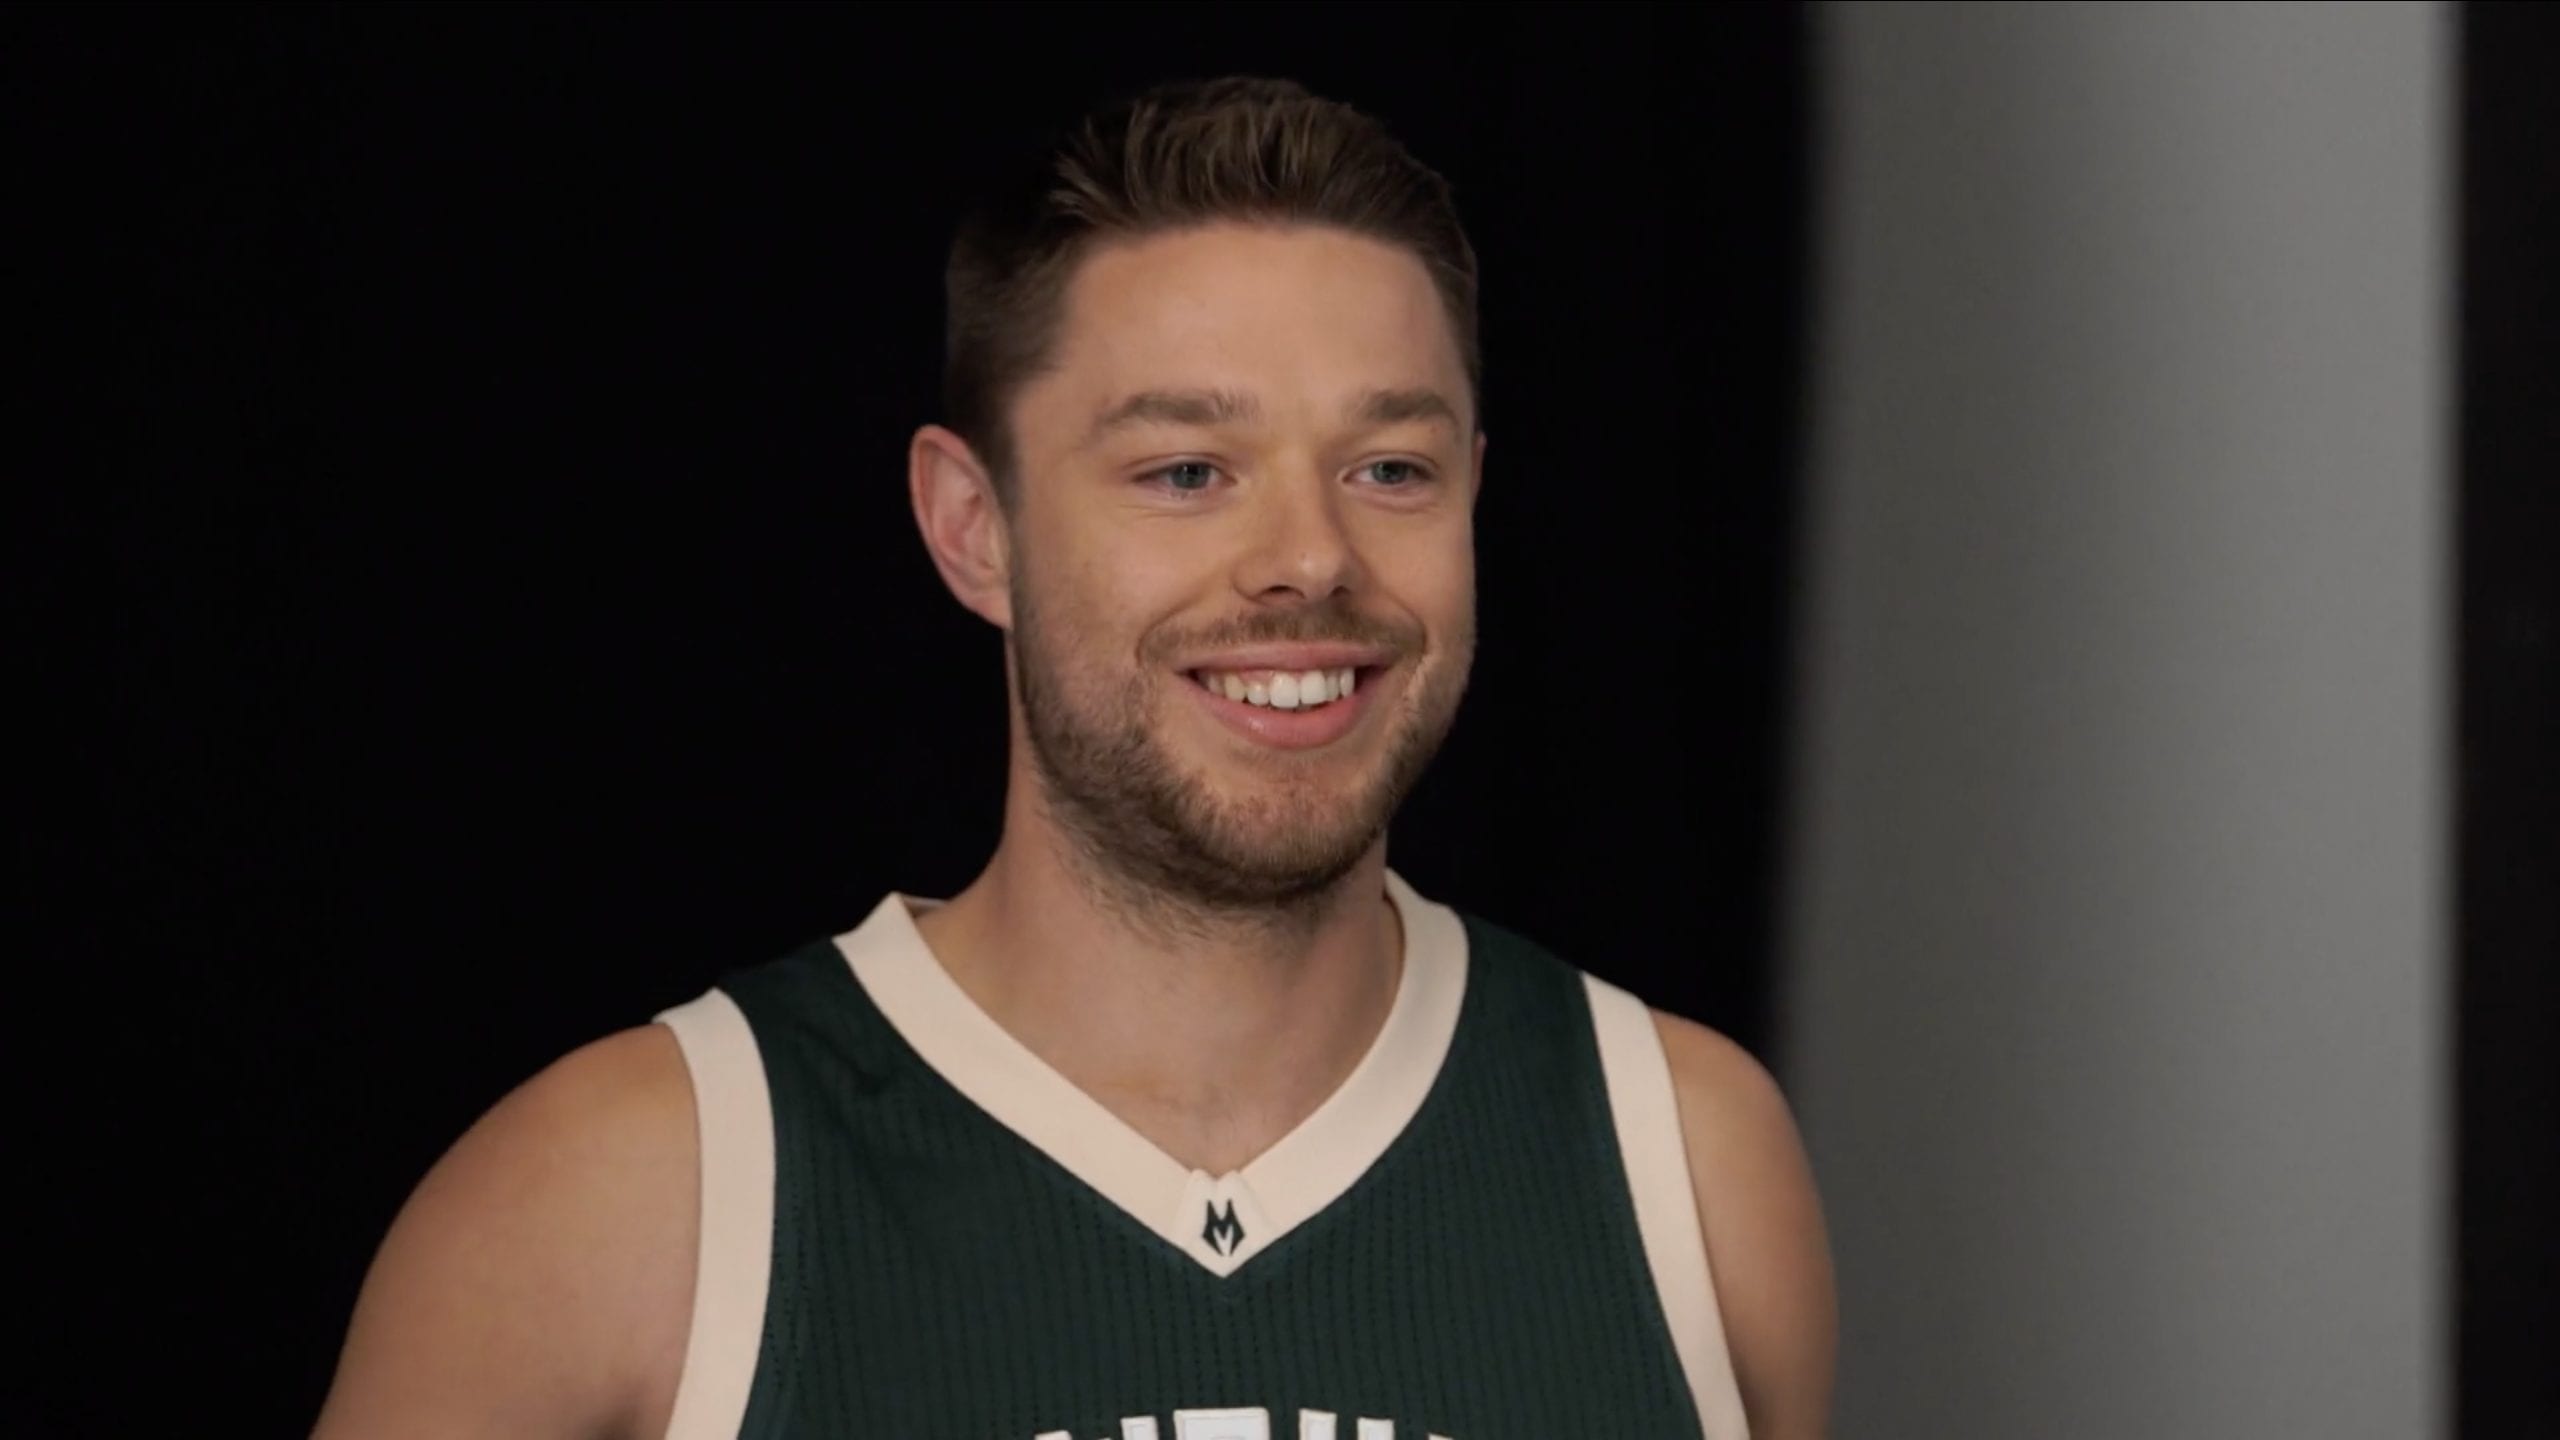 delly video behind the scenes